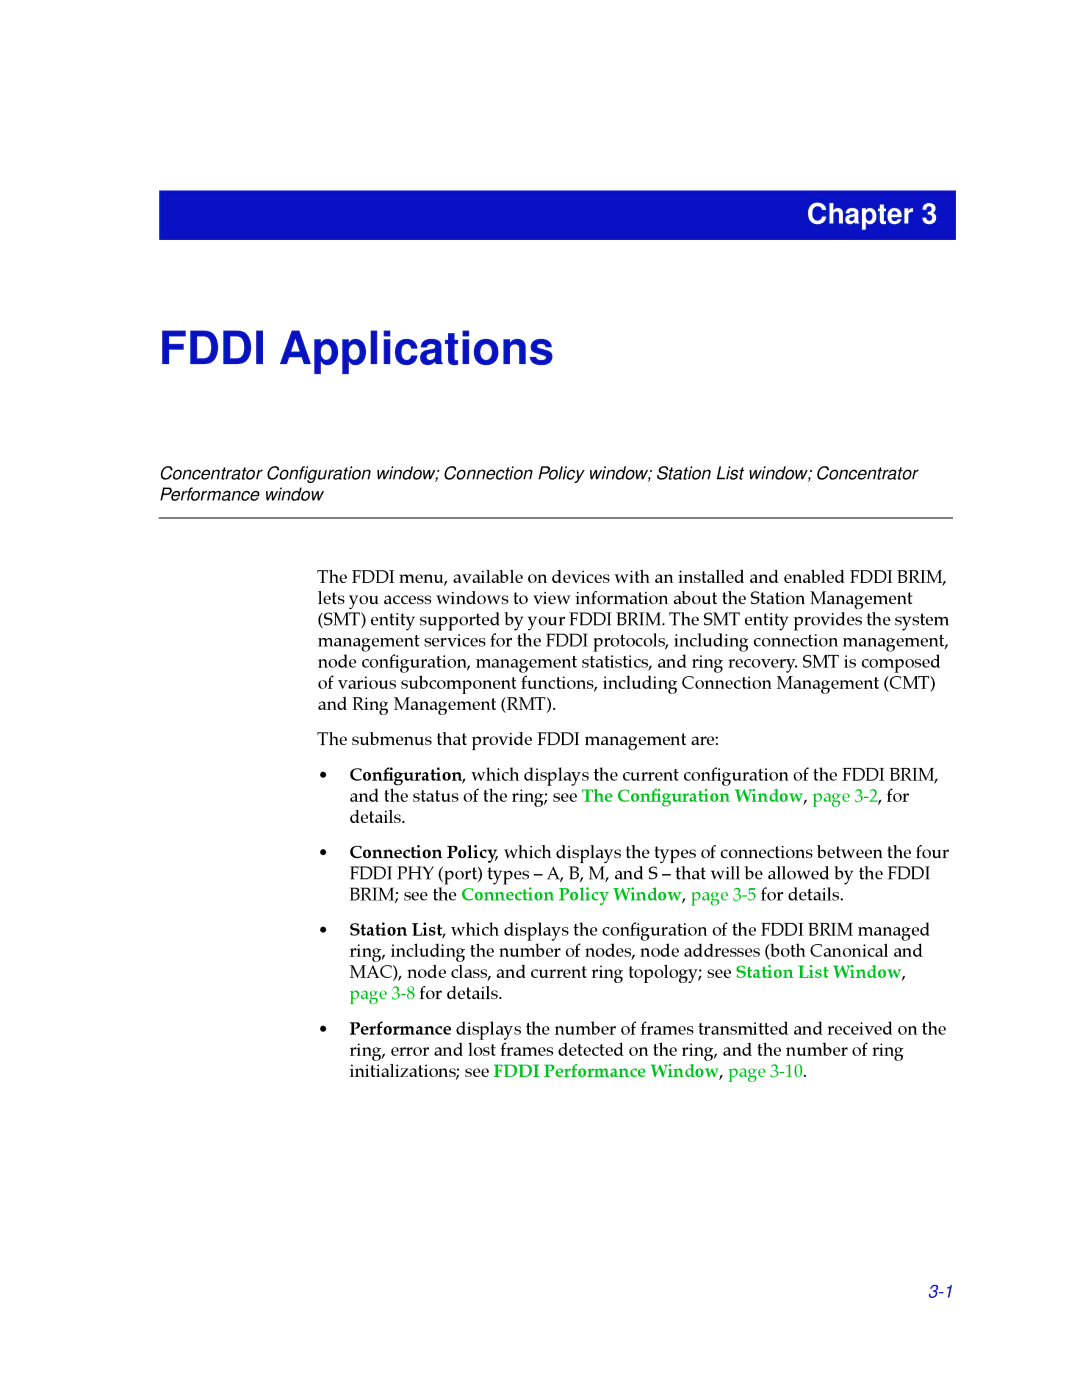 Cabletron Systems 2.2 manual Fddi Applications 